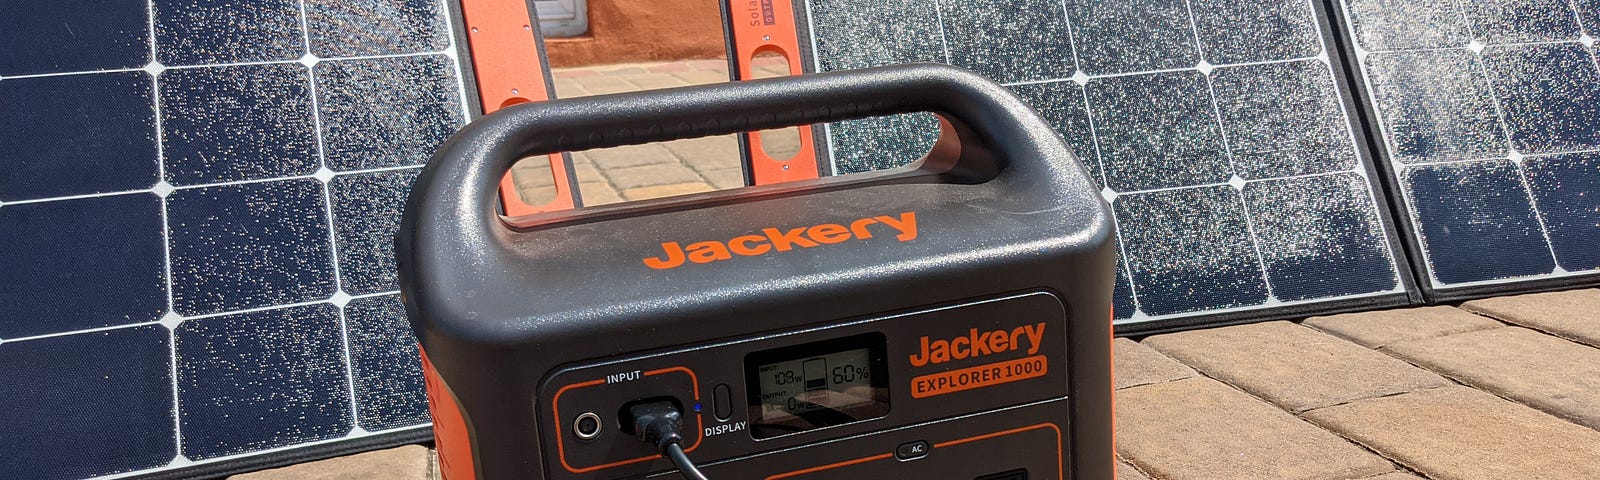 Jackery Explorer 1000W Portable Power Station Review: the new 'ol reliable, by Stefan Etienne